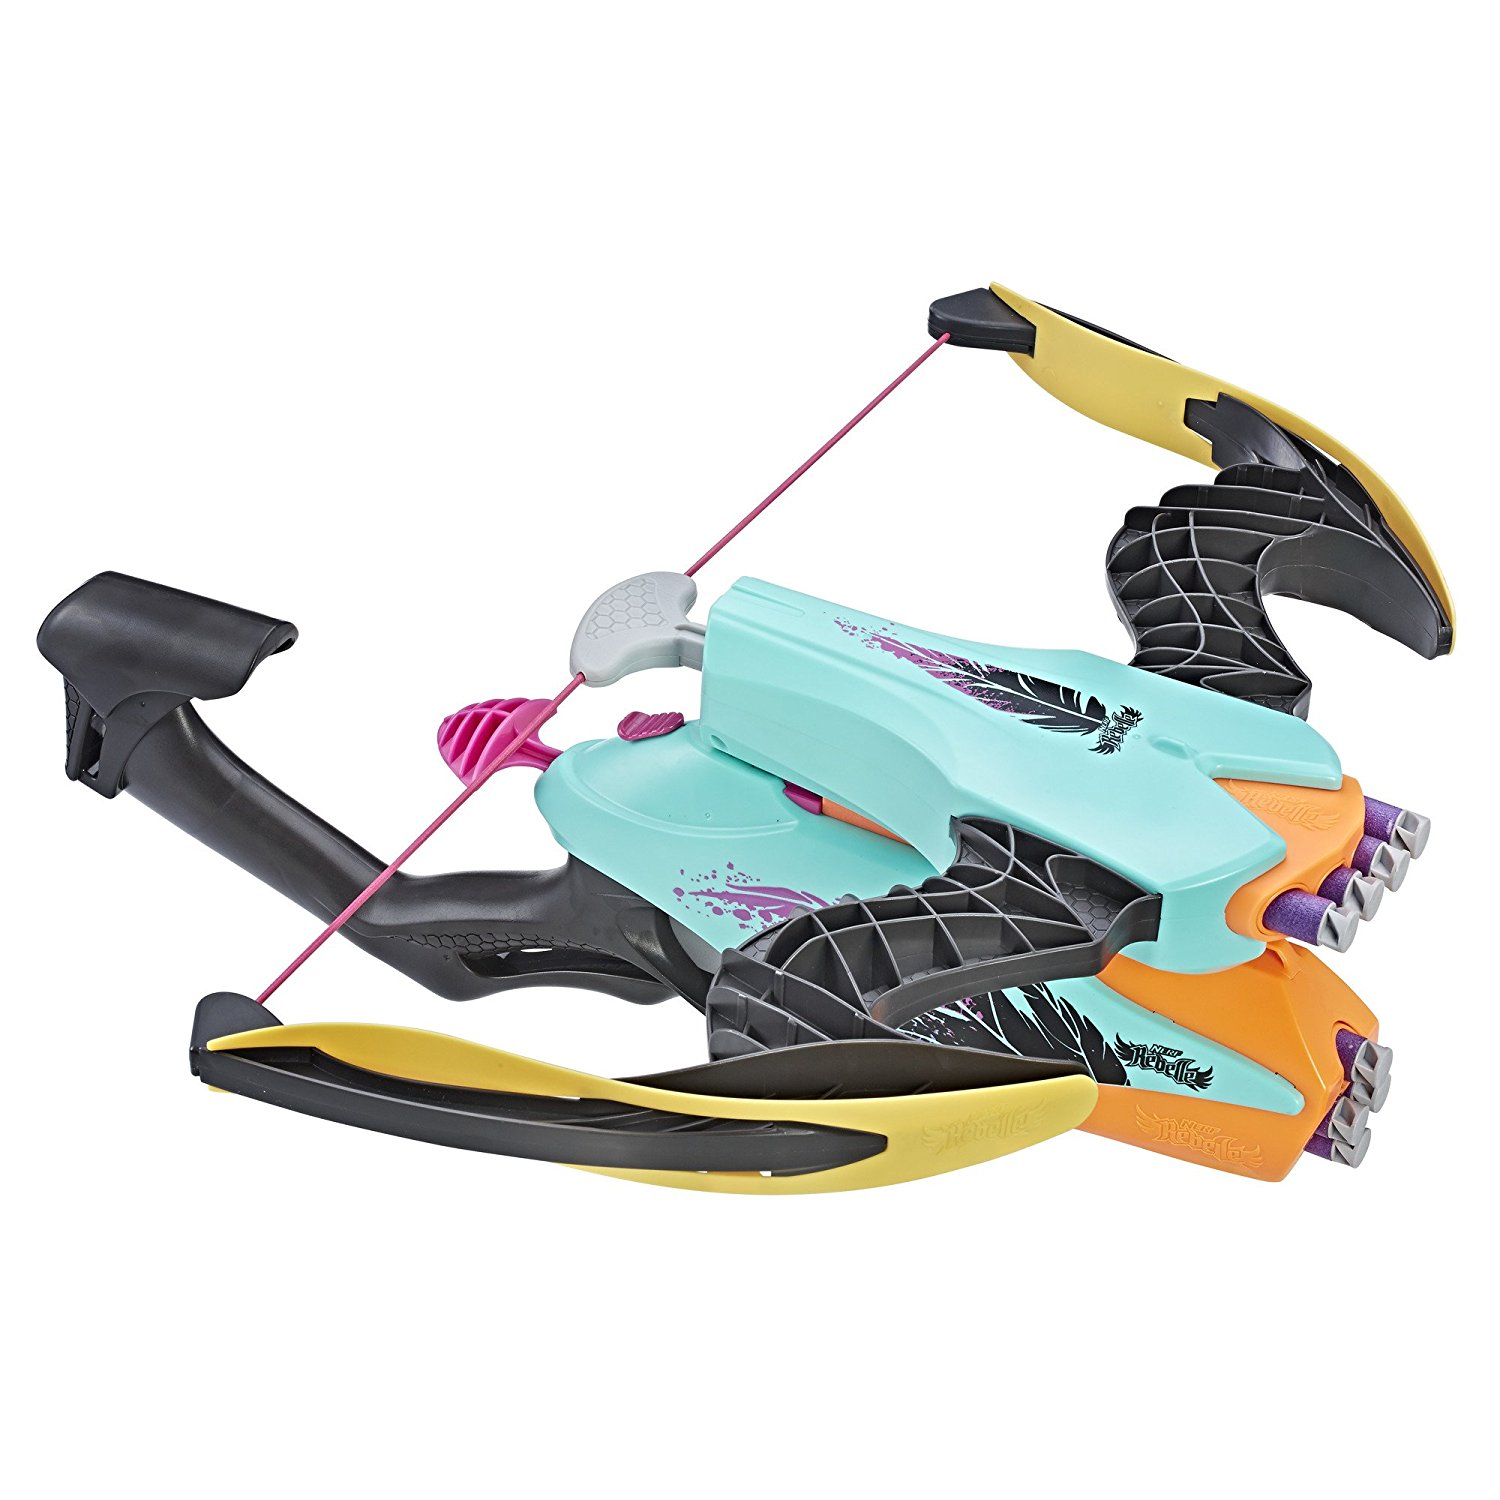 Prime Day Deal – Nerf Rebelle Combow – Just $14.99!